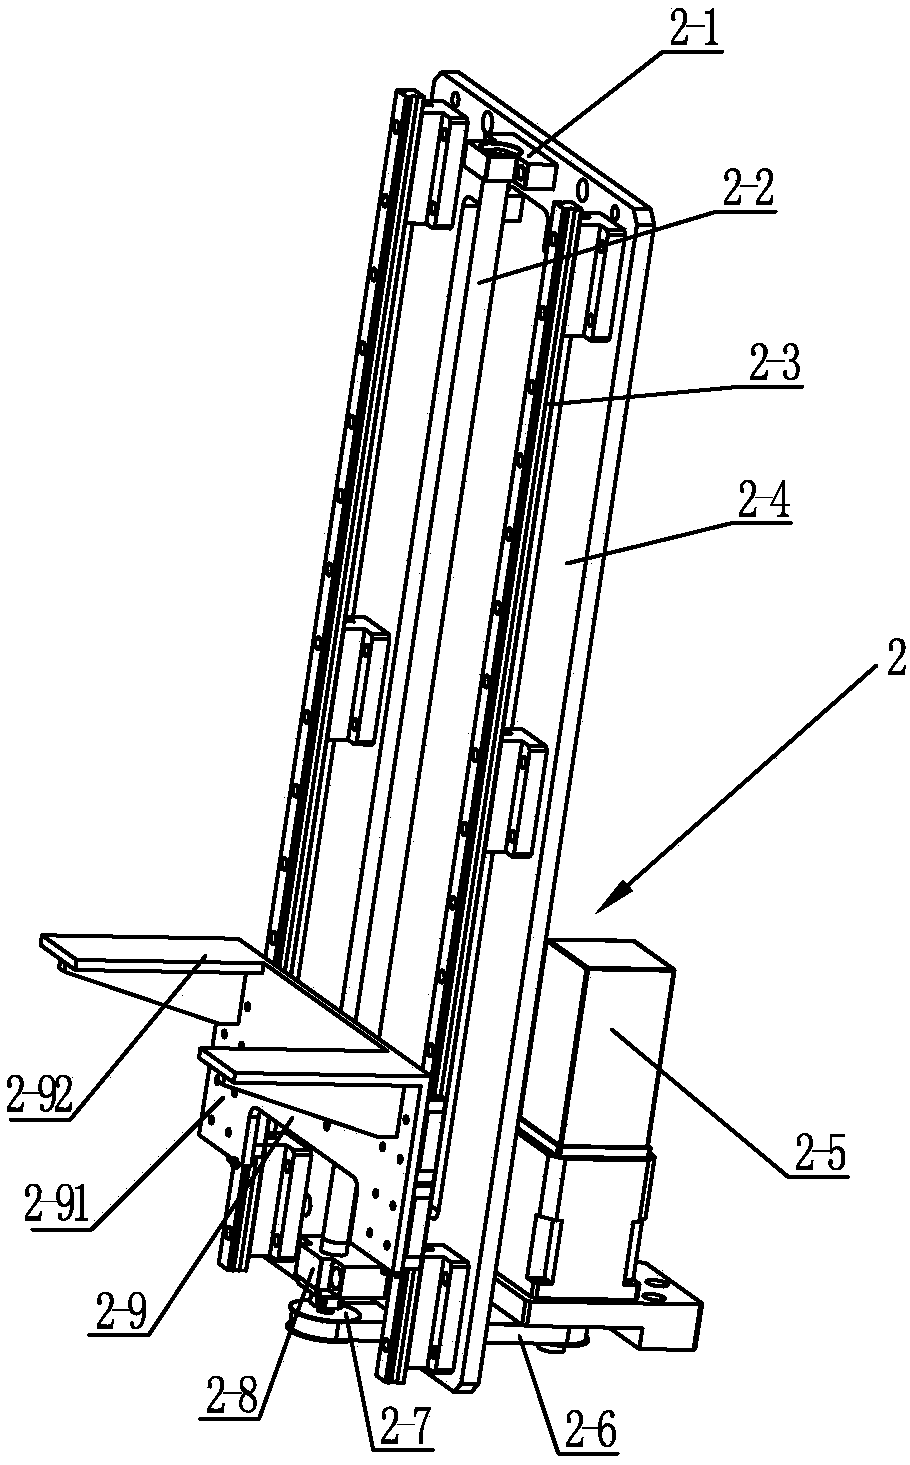 Feeding device for automated production lines